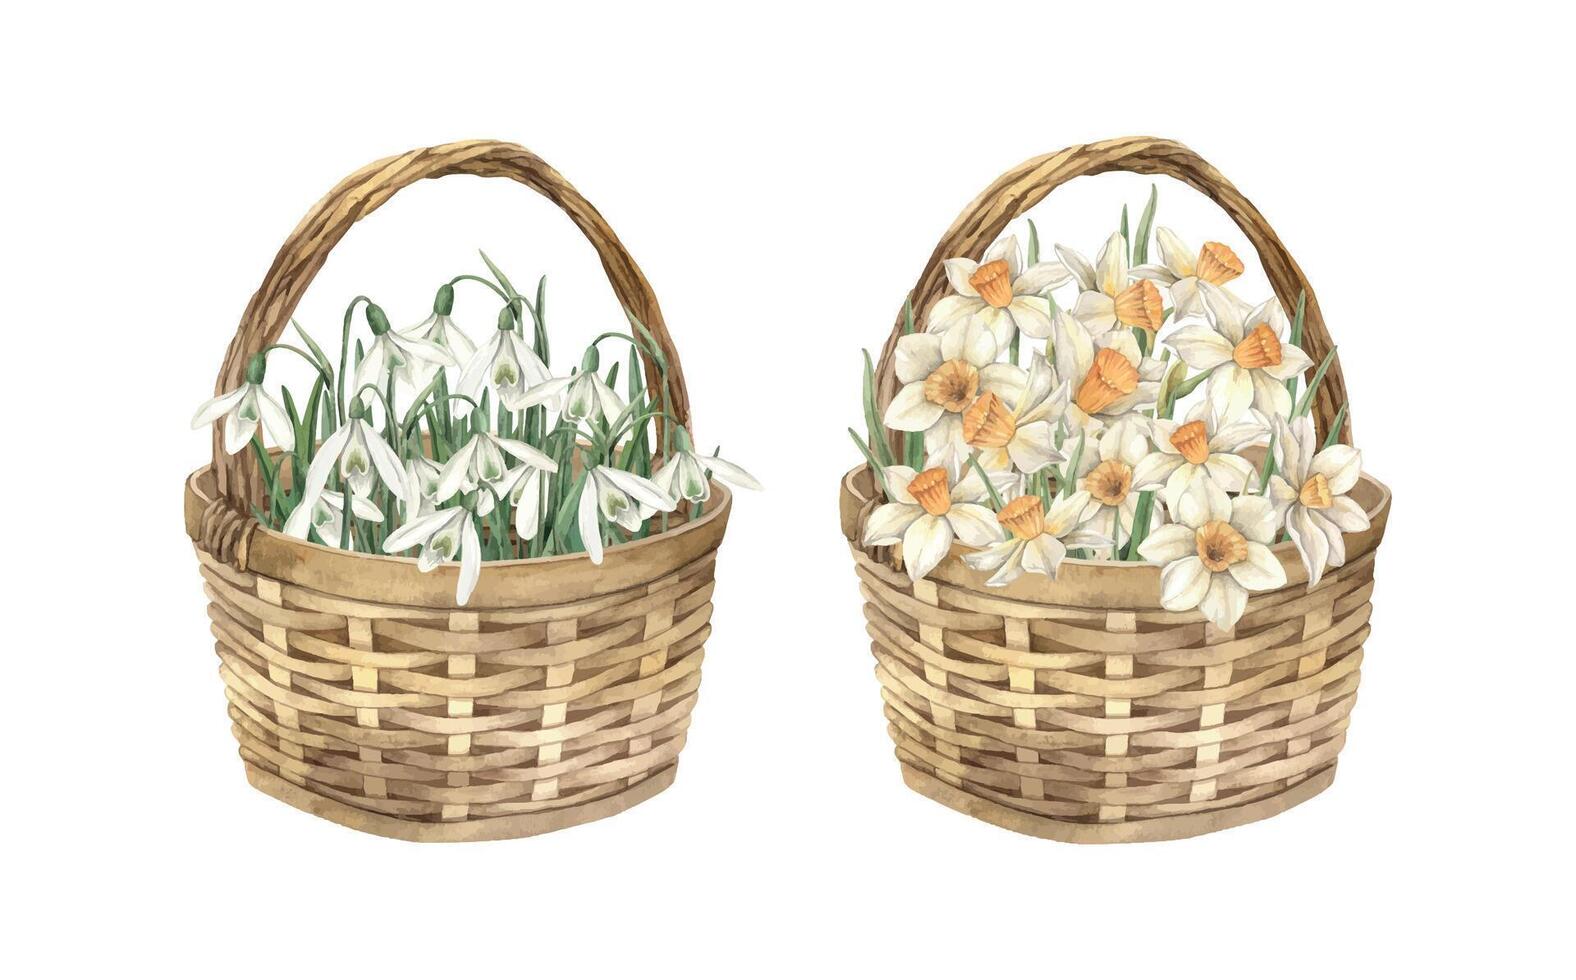 Watercolor set with wicker baskets, flowers, snowdrops and daffodils. Illustration hand drawn on isolated background for greeting cards, invitations, happy holidays, posters, graphics, packaging vector